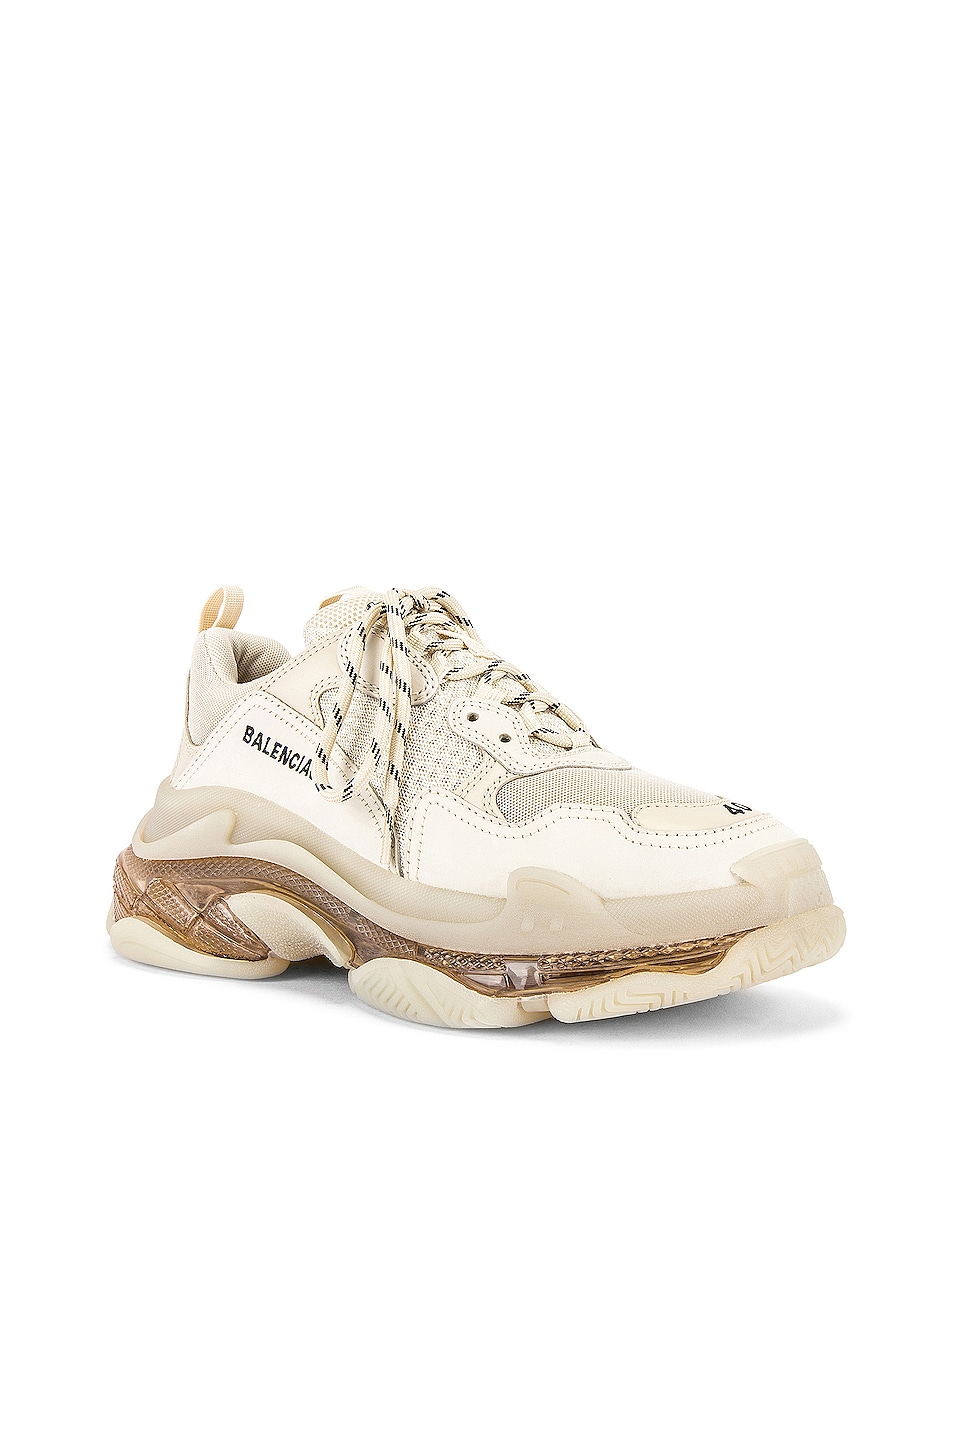 Image 1 of Balenciaga Triple S Clear Sole in Off White